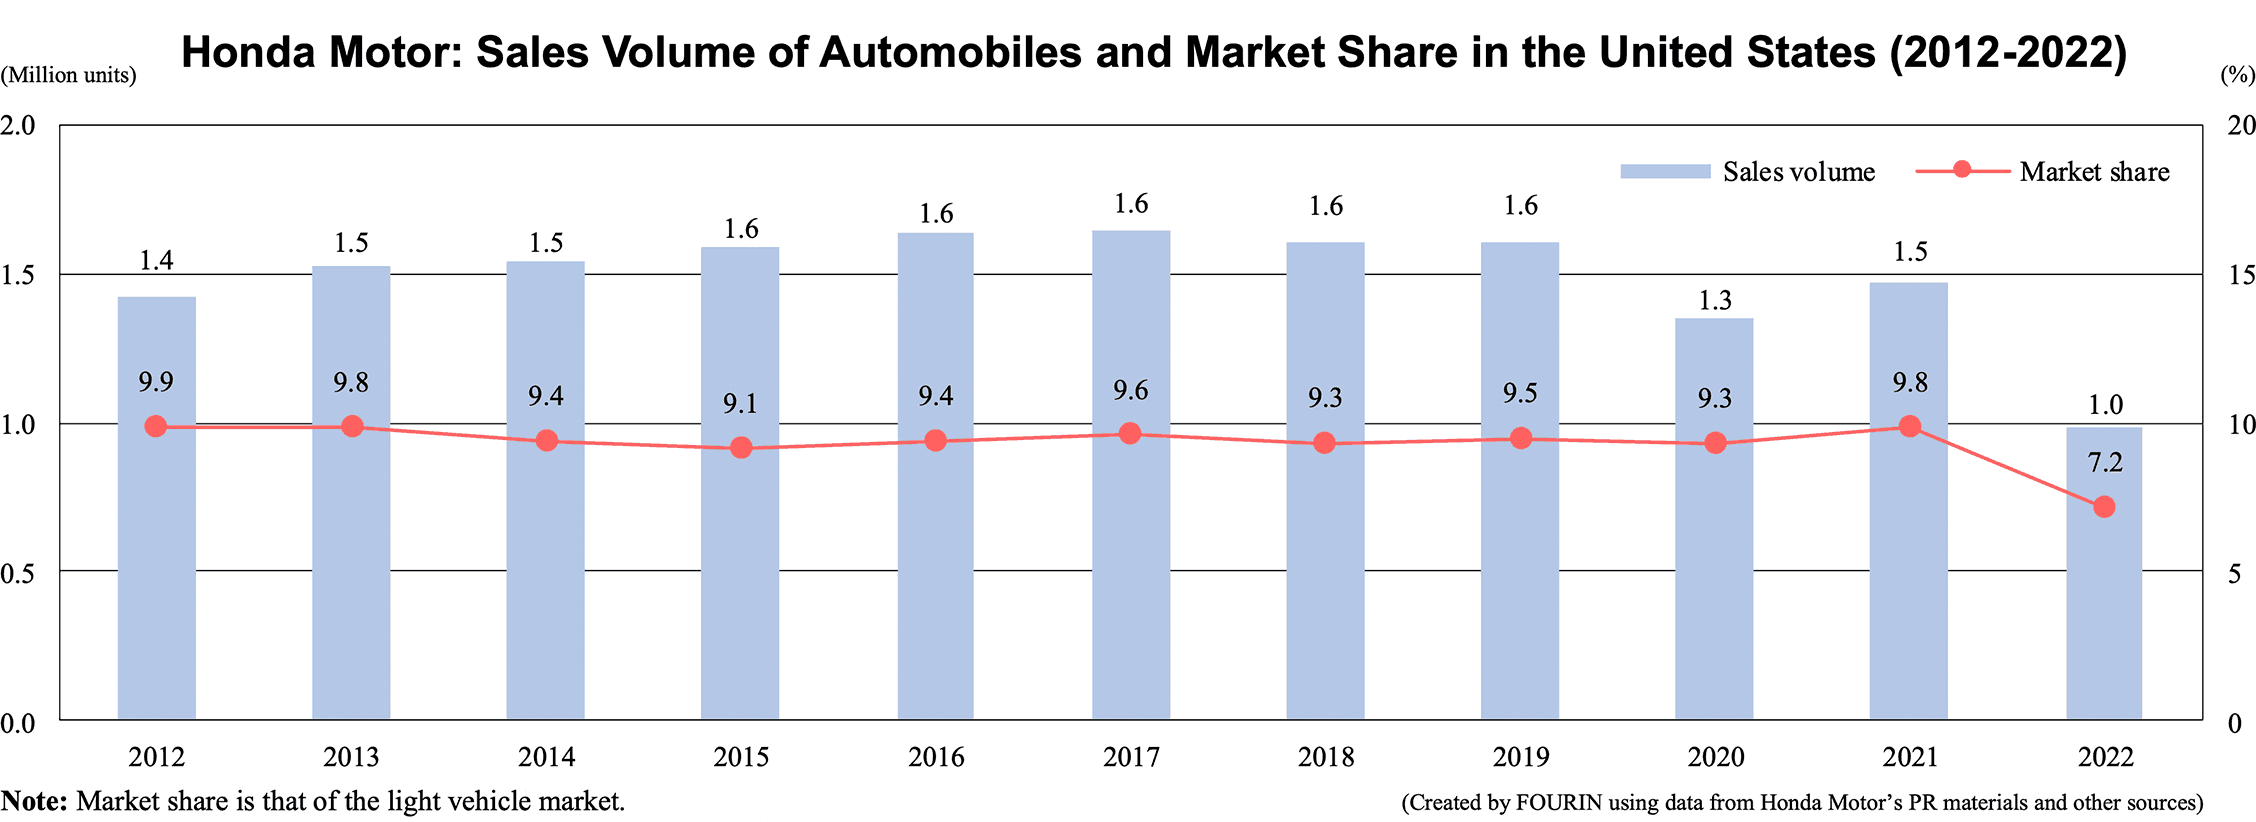 Honda Motor: Sales Volume of Automobiles and Market Share in the United States (2012-2022)